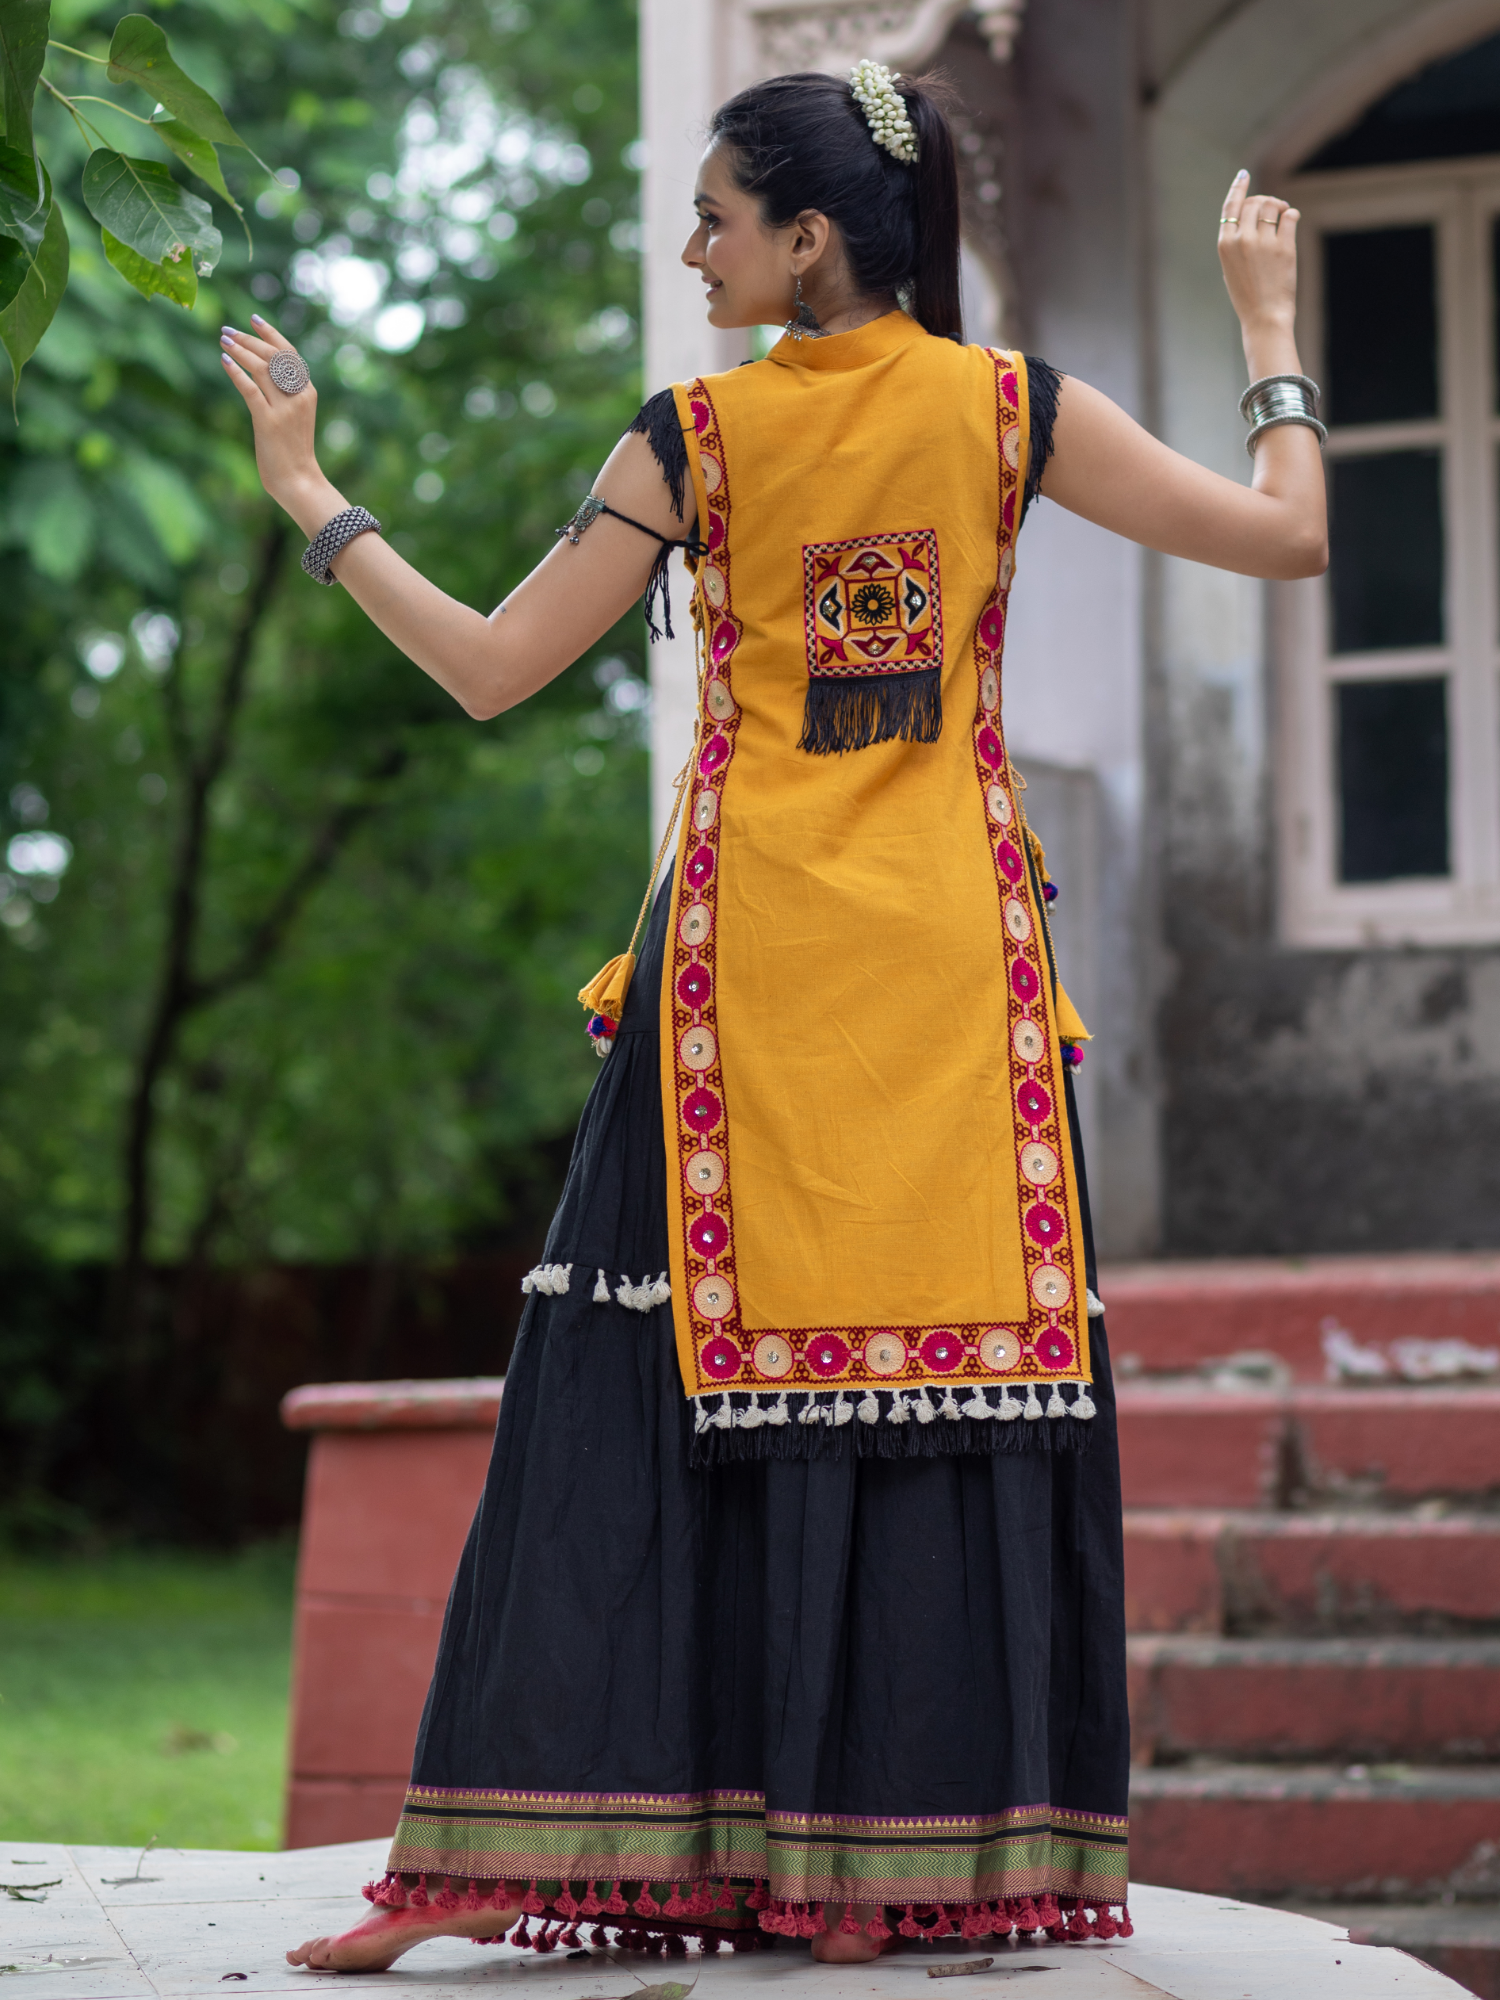 Mustard yellow traditional embroidered panel top with black  daman flairy skirt